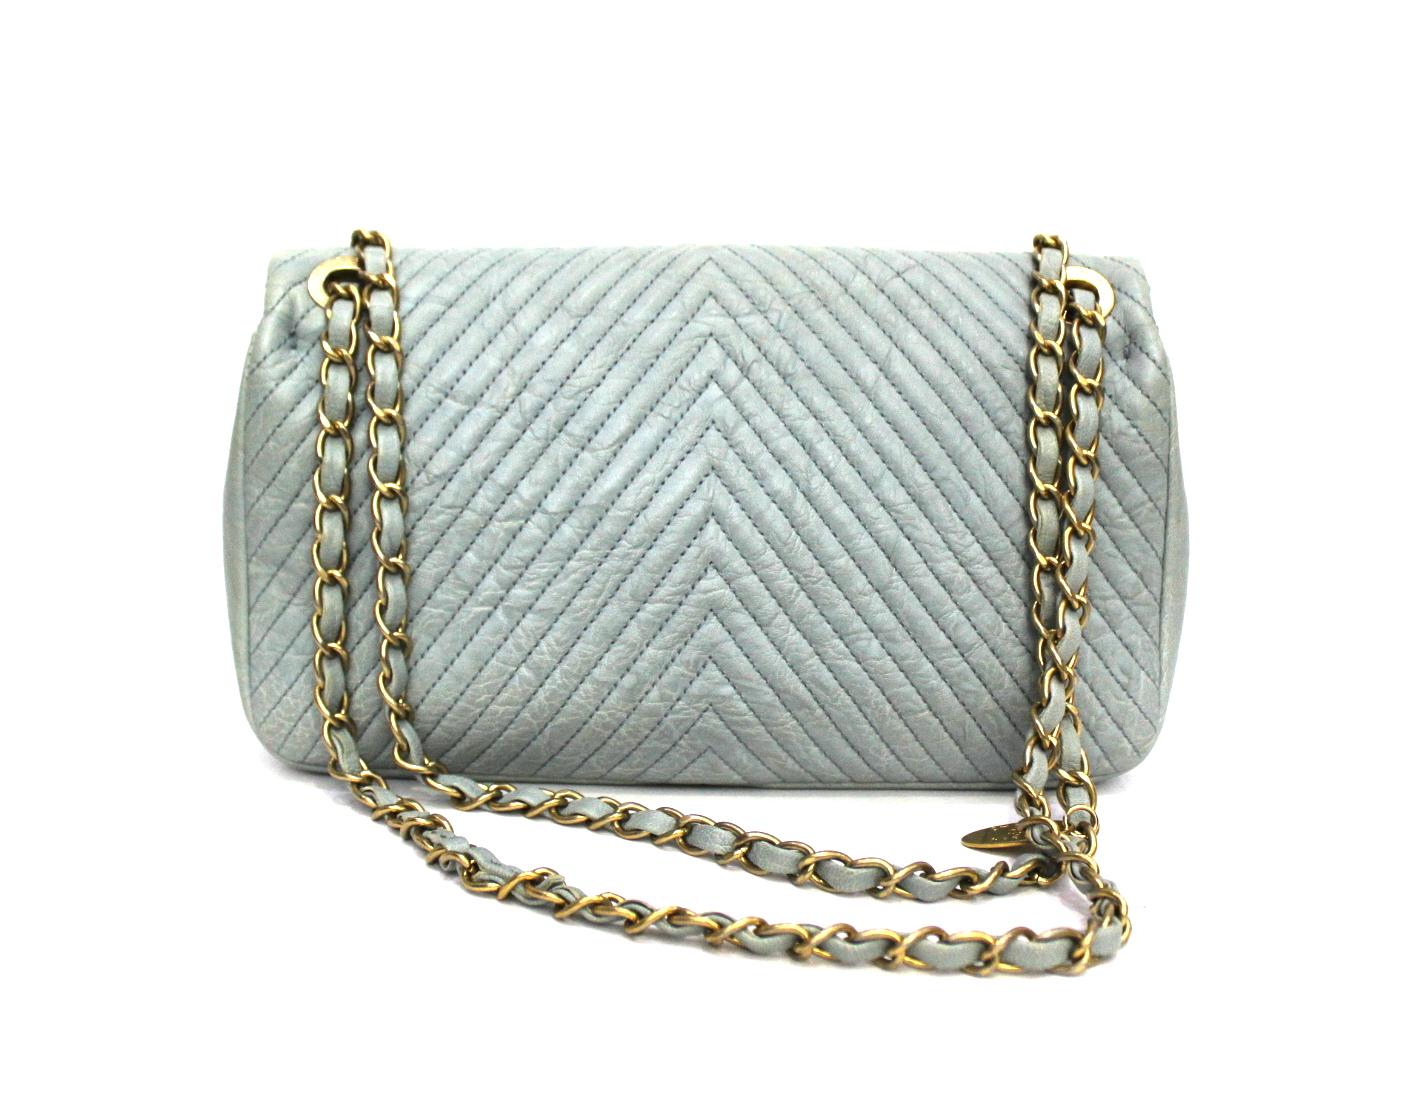 Chanel bag in light blue herringbone powder leather with gold hardware.

Closing with classic CC logo internally quite large.

Year 2014/2015 is in excellent condition.